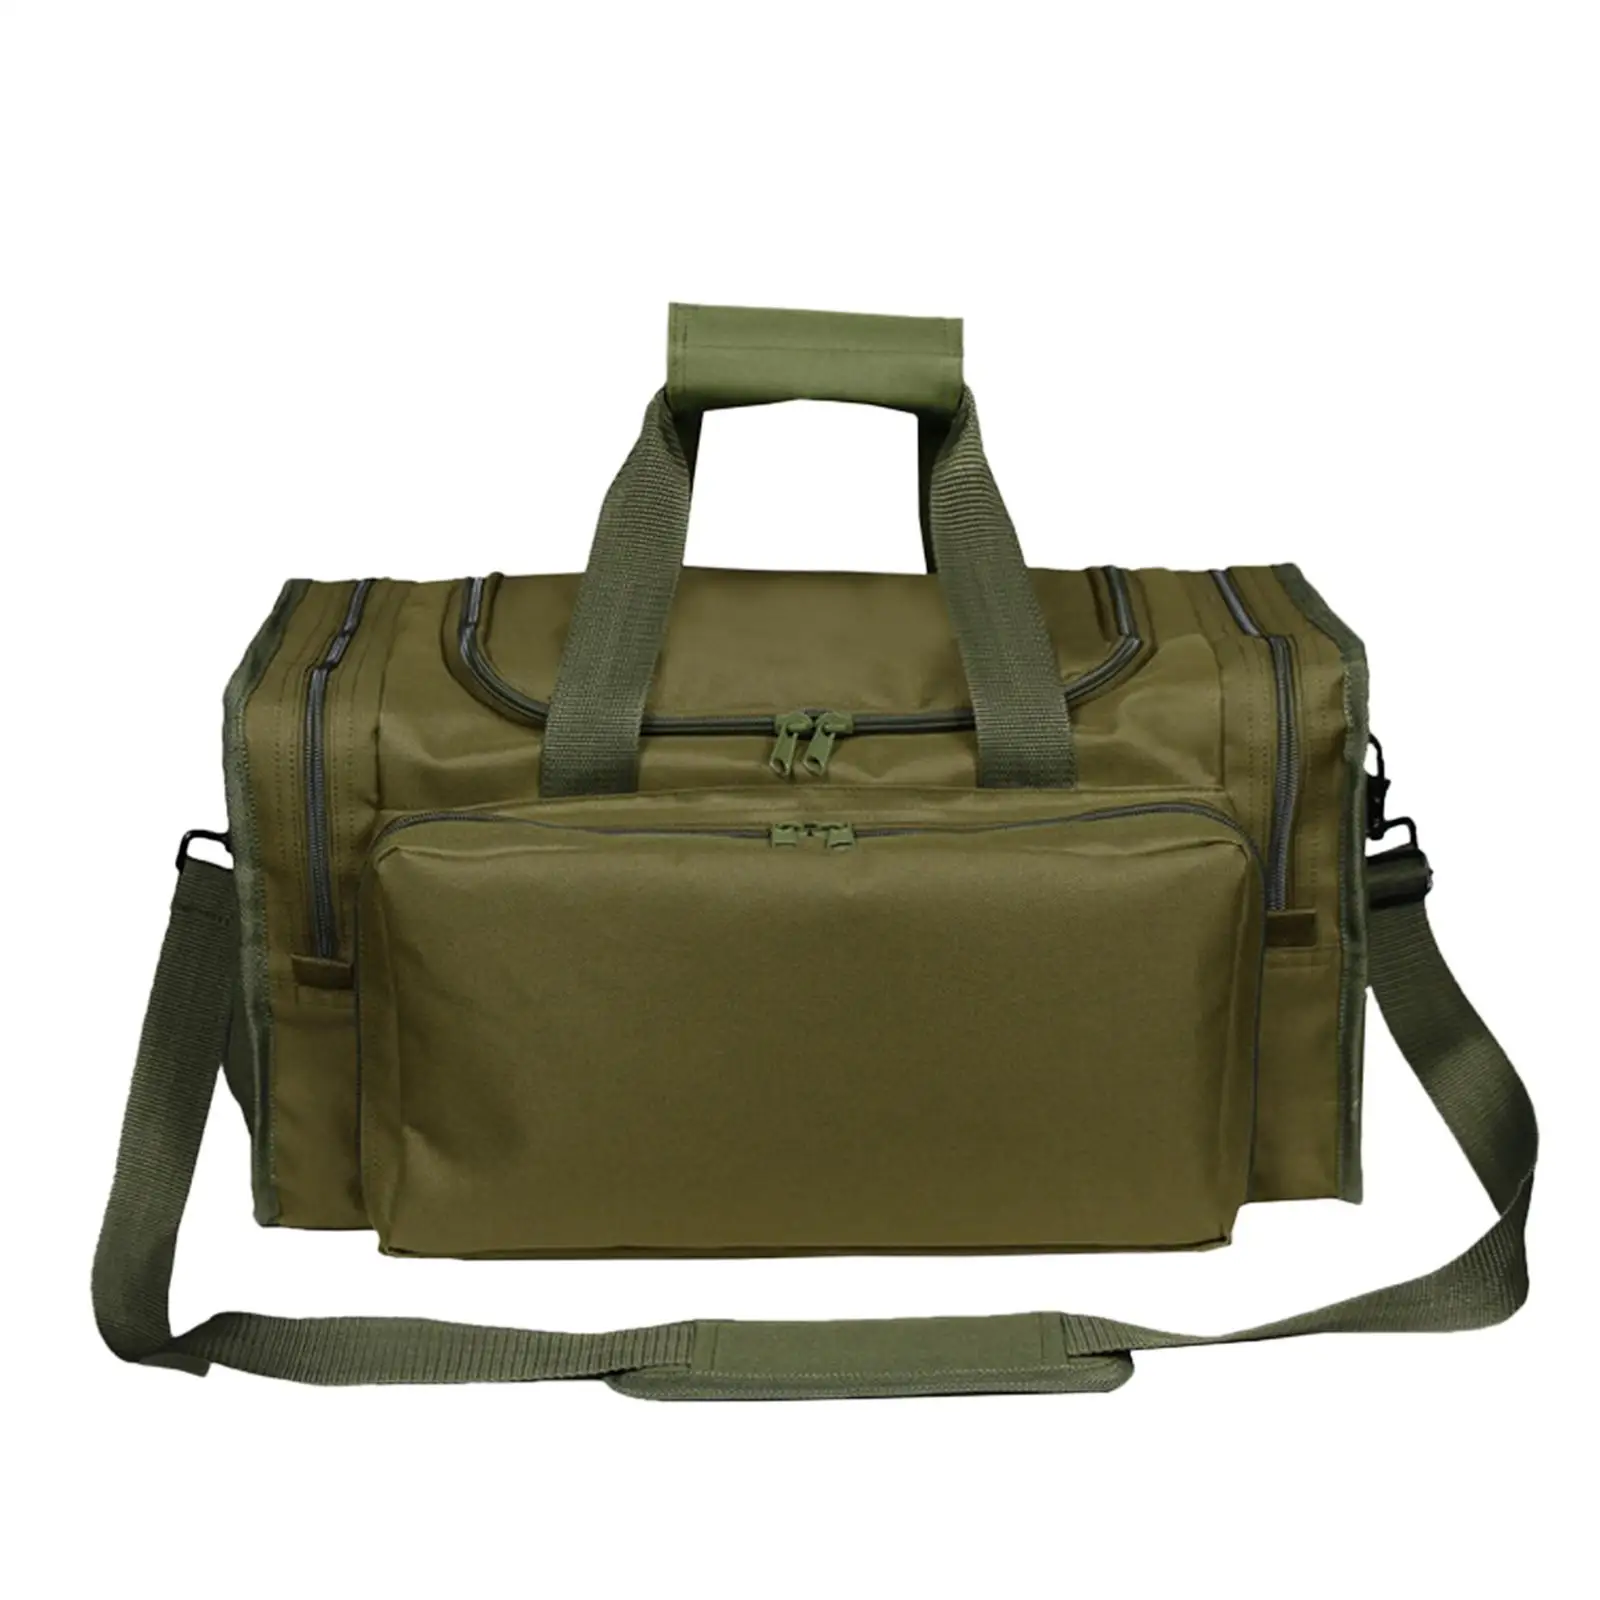 Camping Bag Lunch Box Large Capacity Oxford Cloth Portable for Hiking Grill